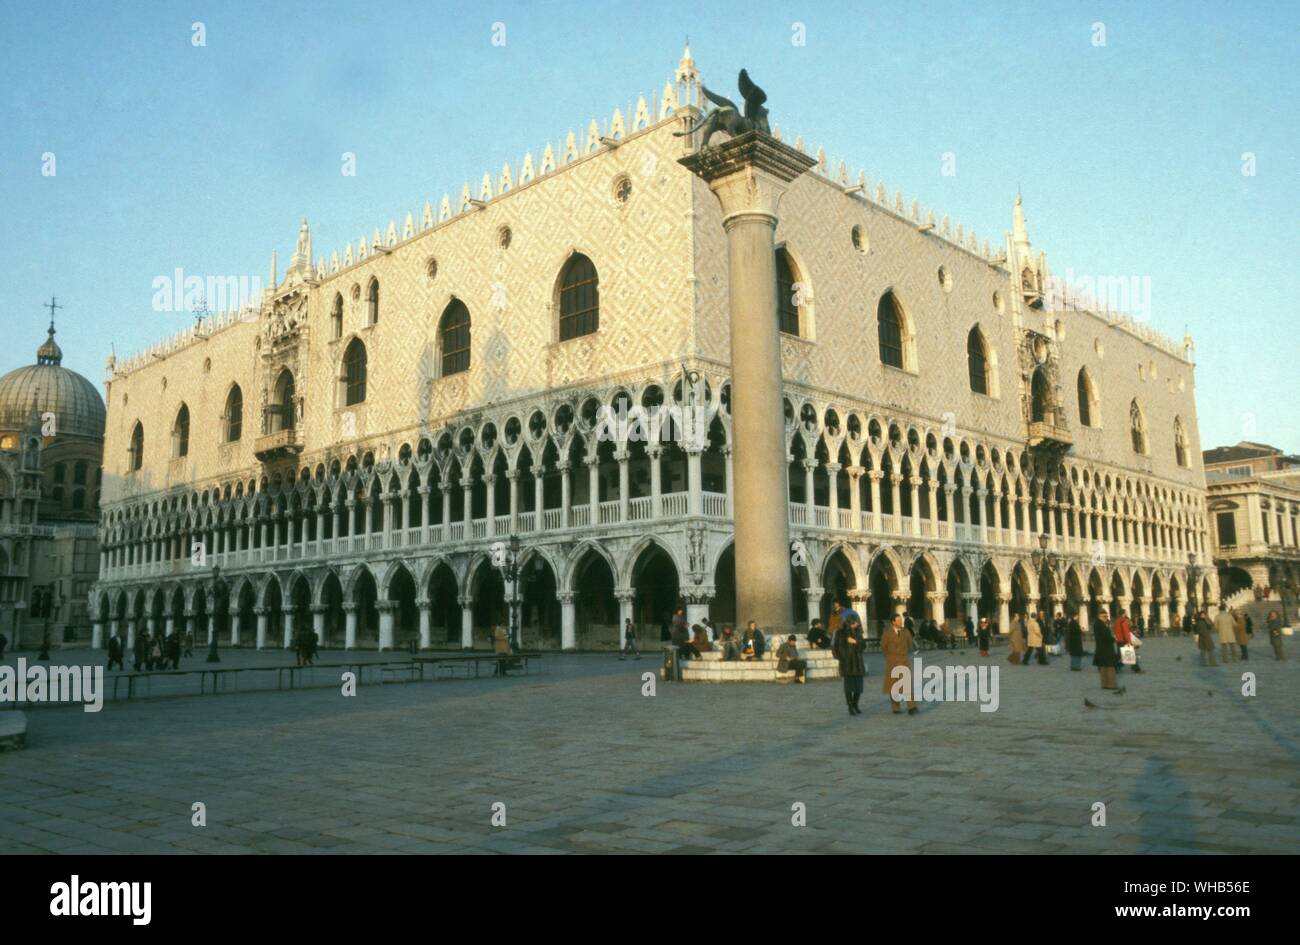 The Doges Palace - Venice - The Doge's Palace is a gothic palace in Venice. In Italian it is called the Palazzo Ducale di Venezia. The palace was the residence of the Doge of Venice.. Stock Photo